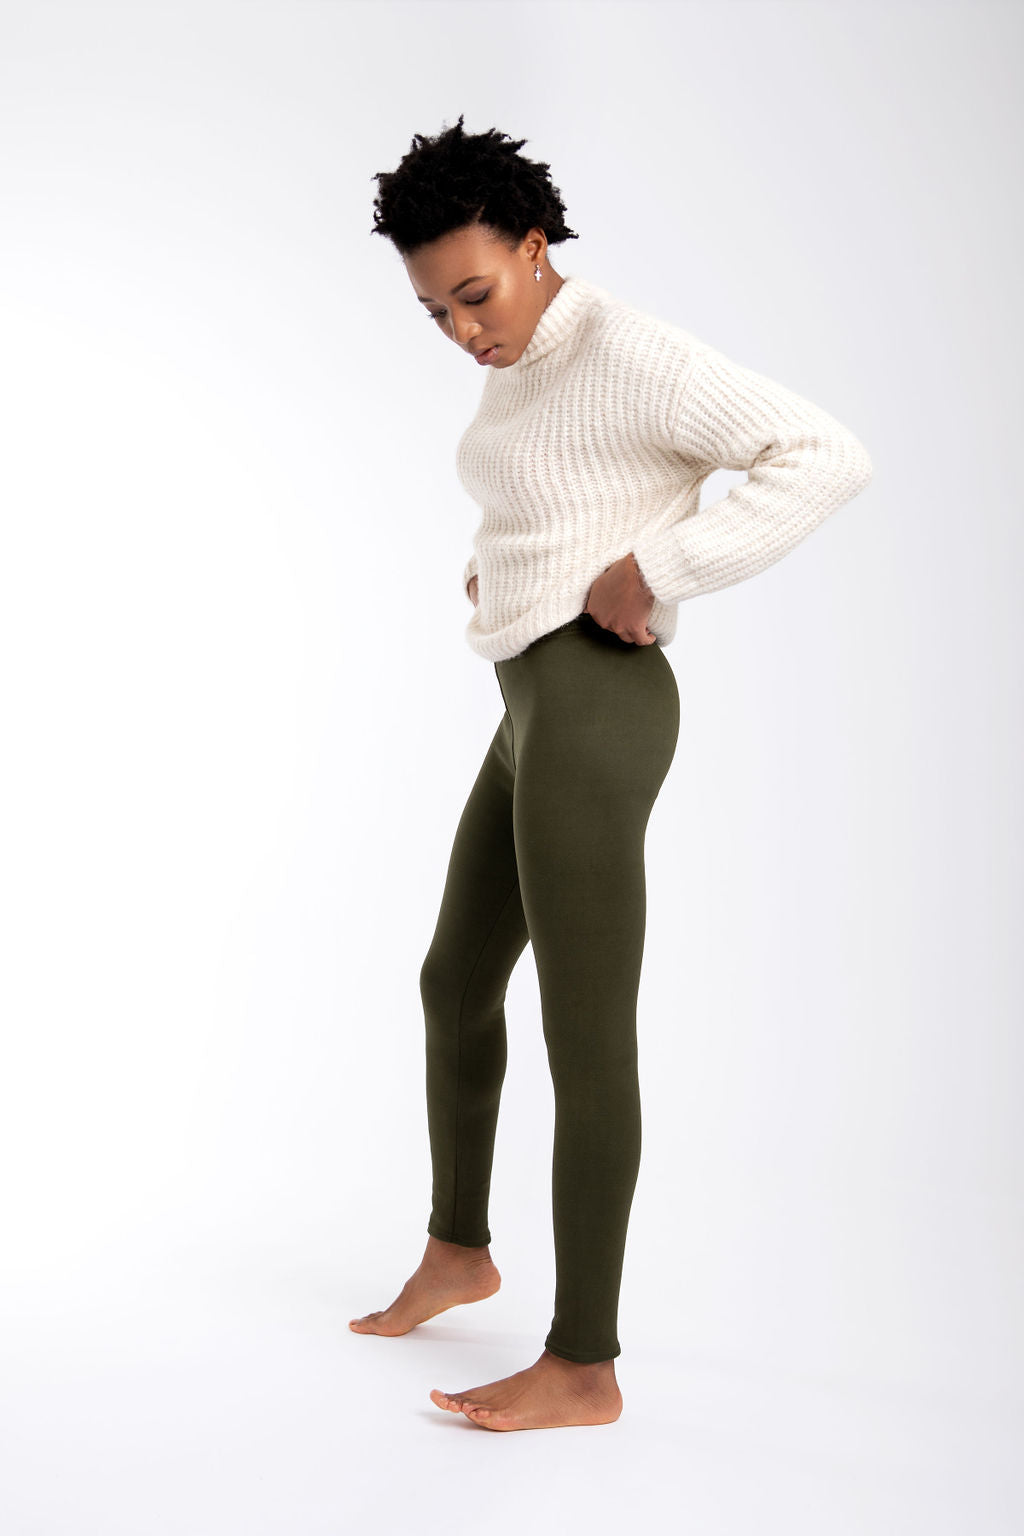 Fur-Lined Leggings Available in M-L – Just Cozy